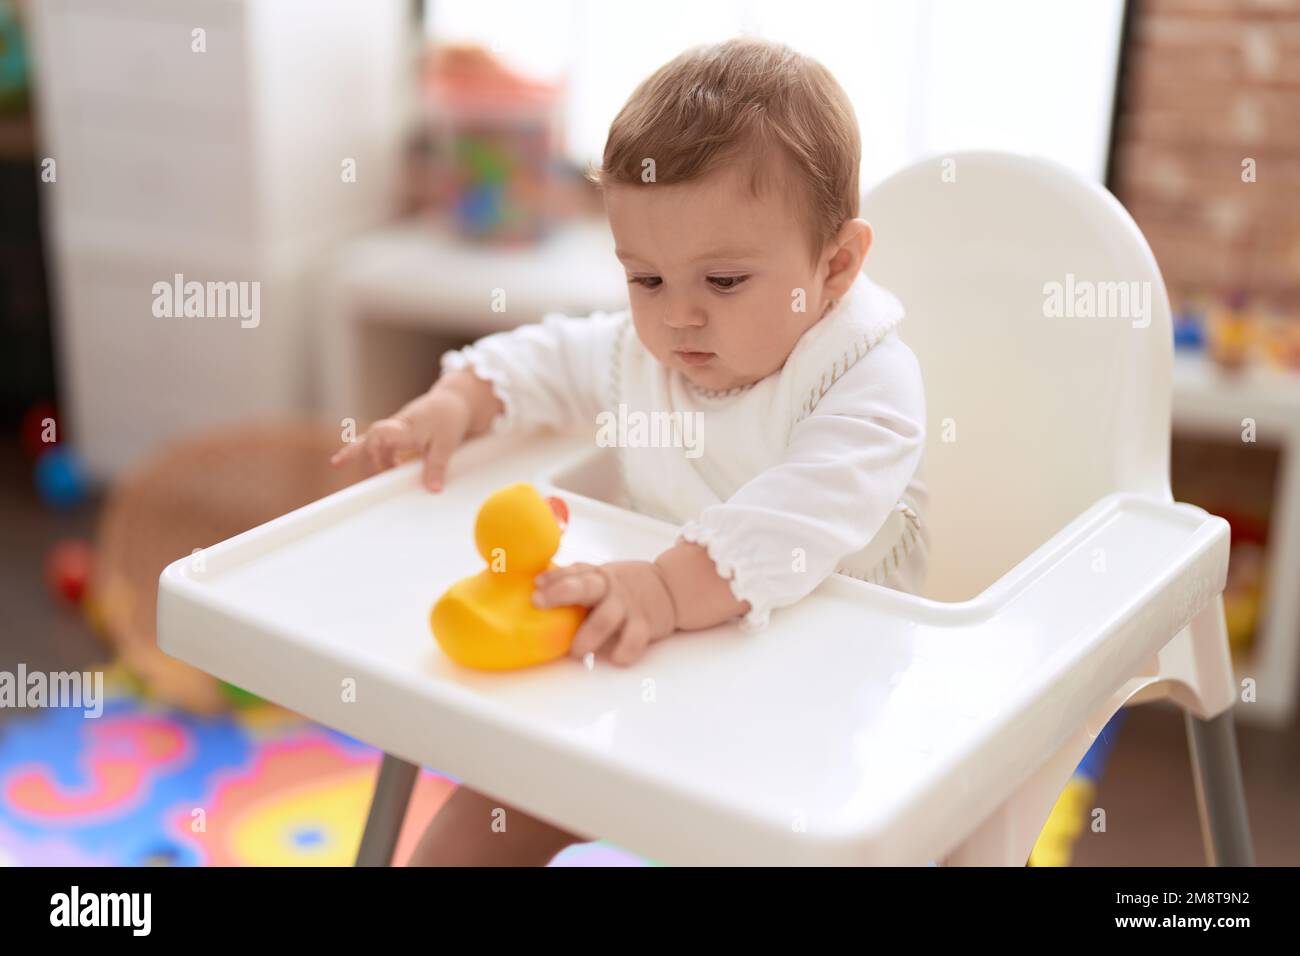 Adorable toddler sitting on baby highchair holding rubber duck toy at kindergarten Stock Photo